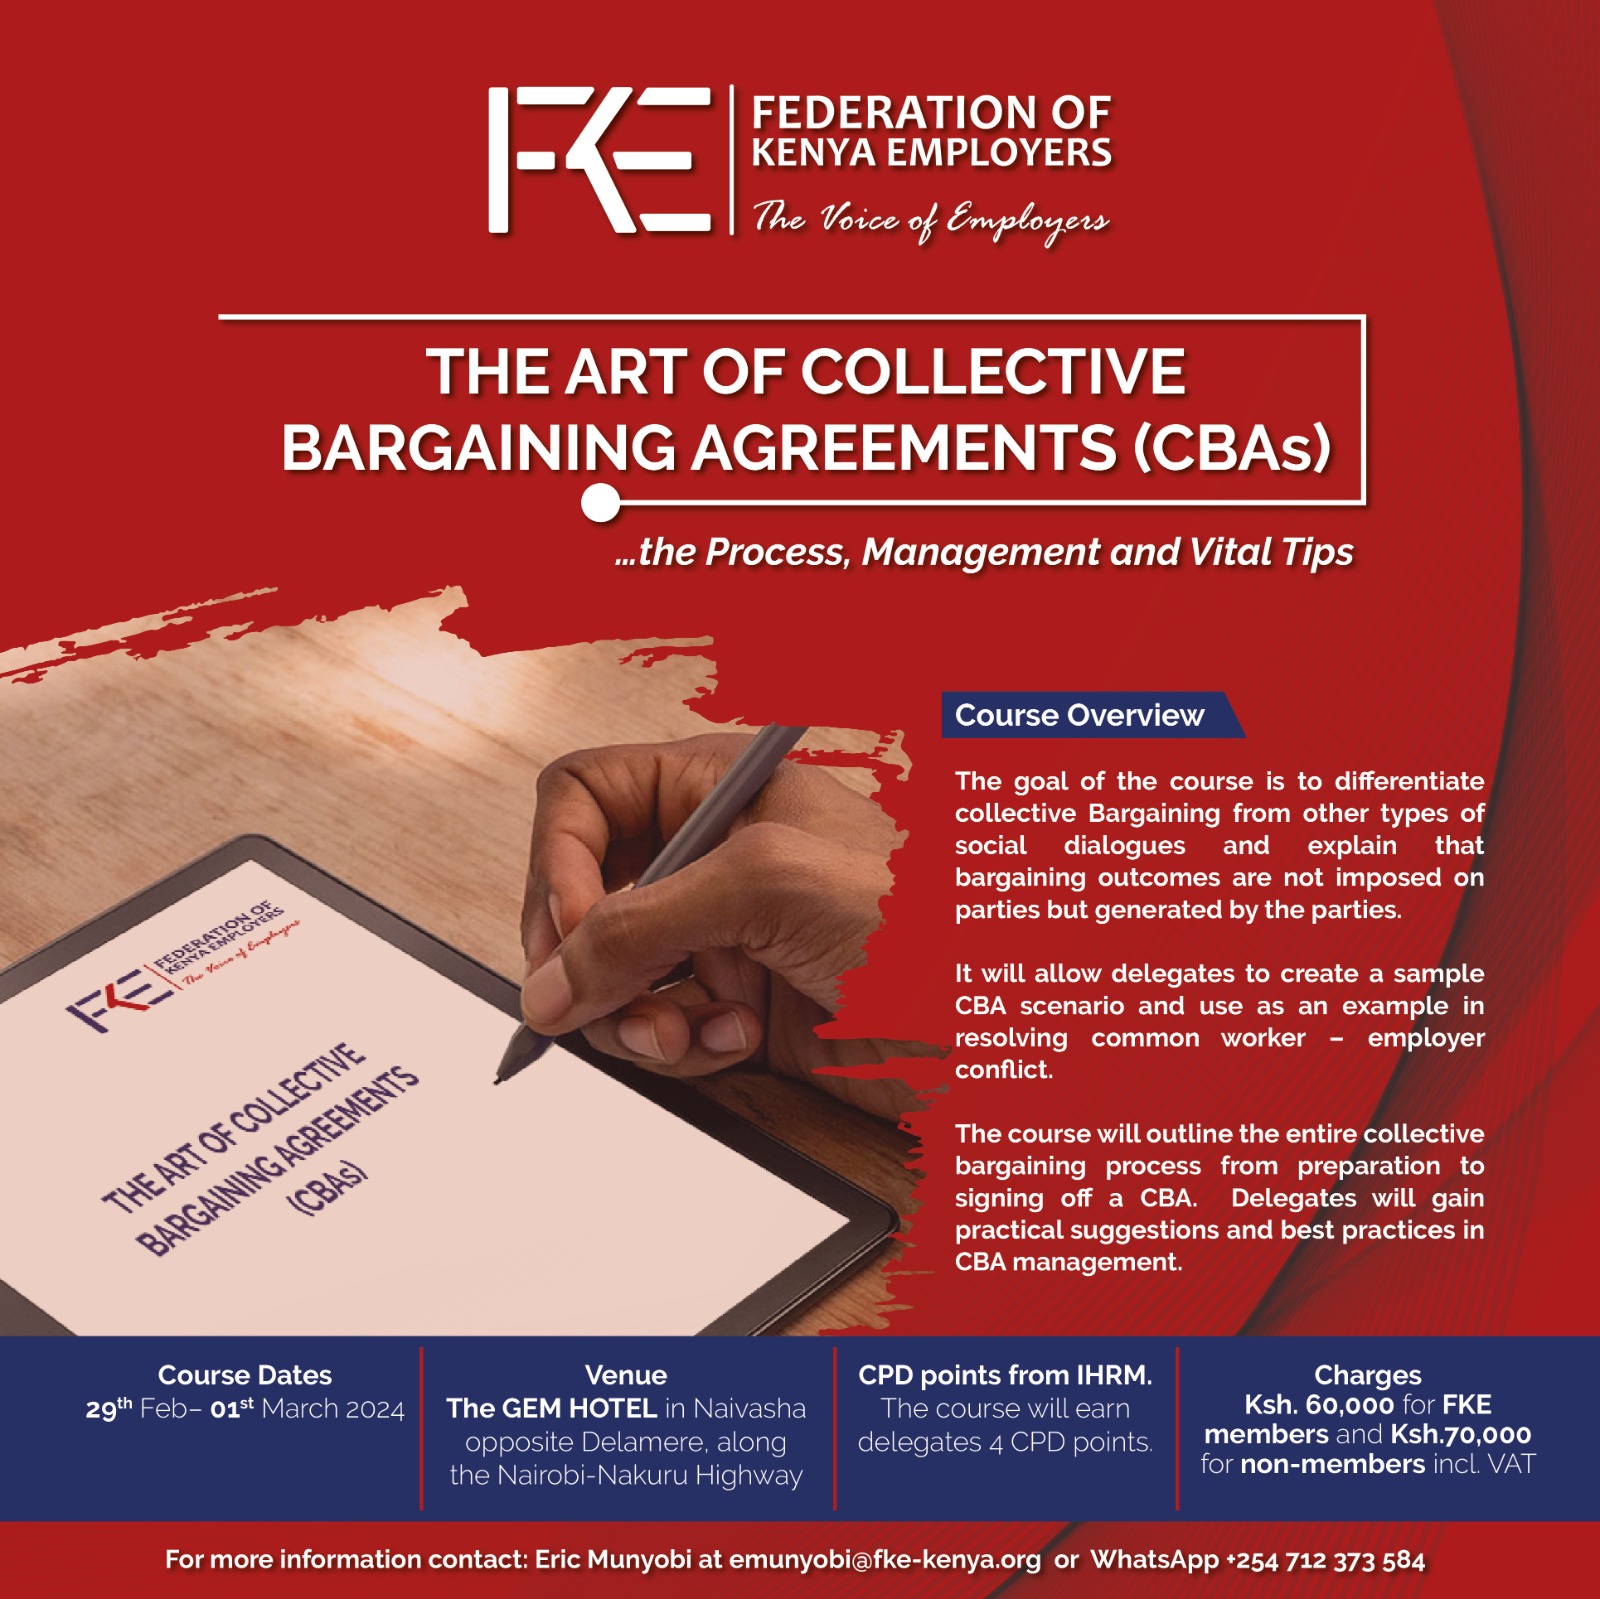 The Art of Collective Bargaining Agreements (CBAs)